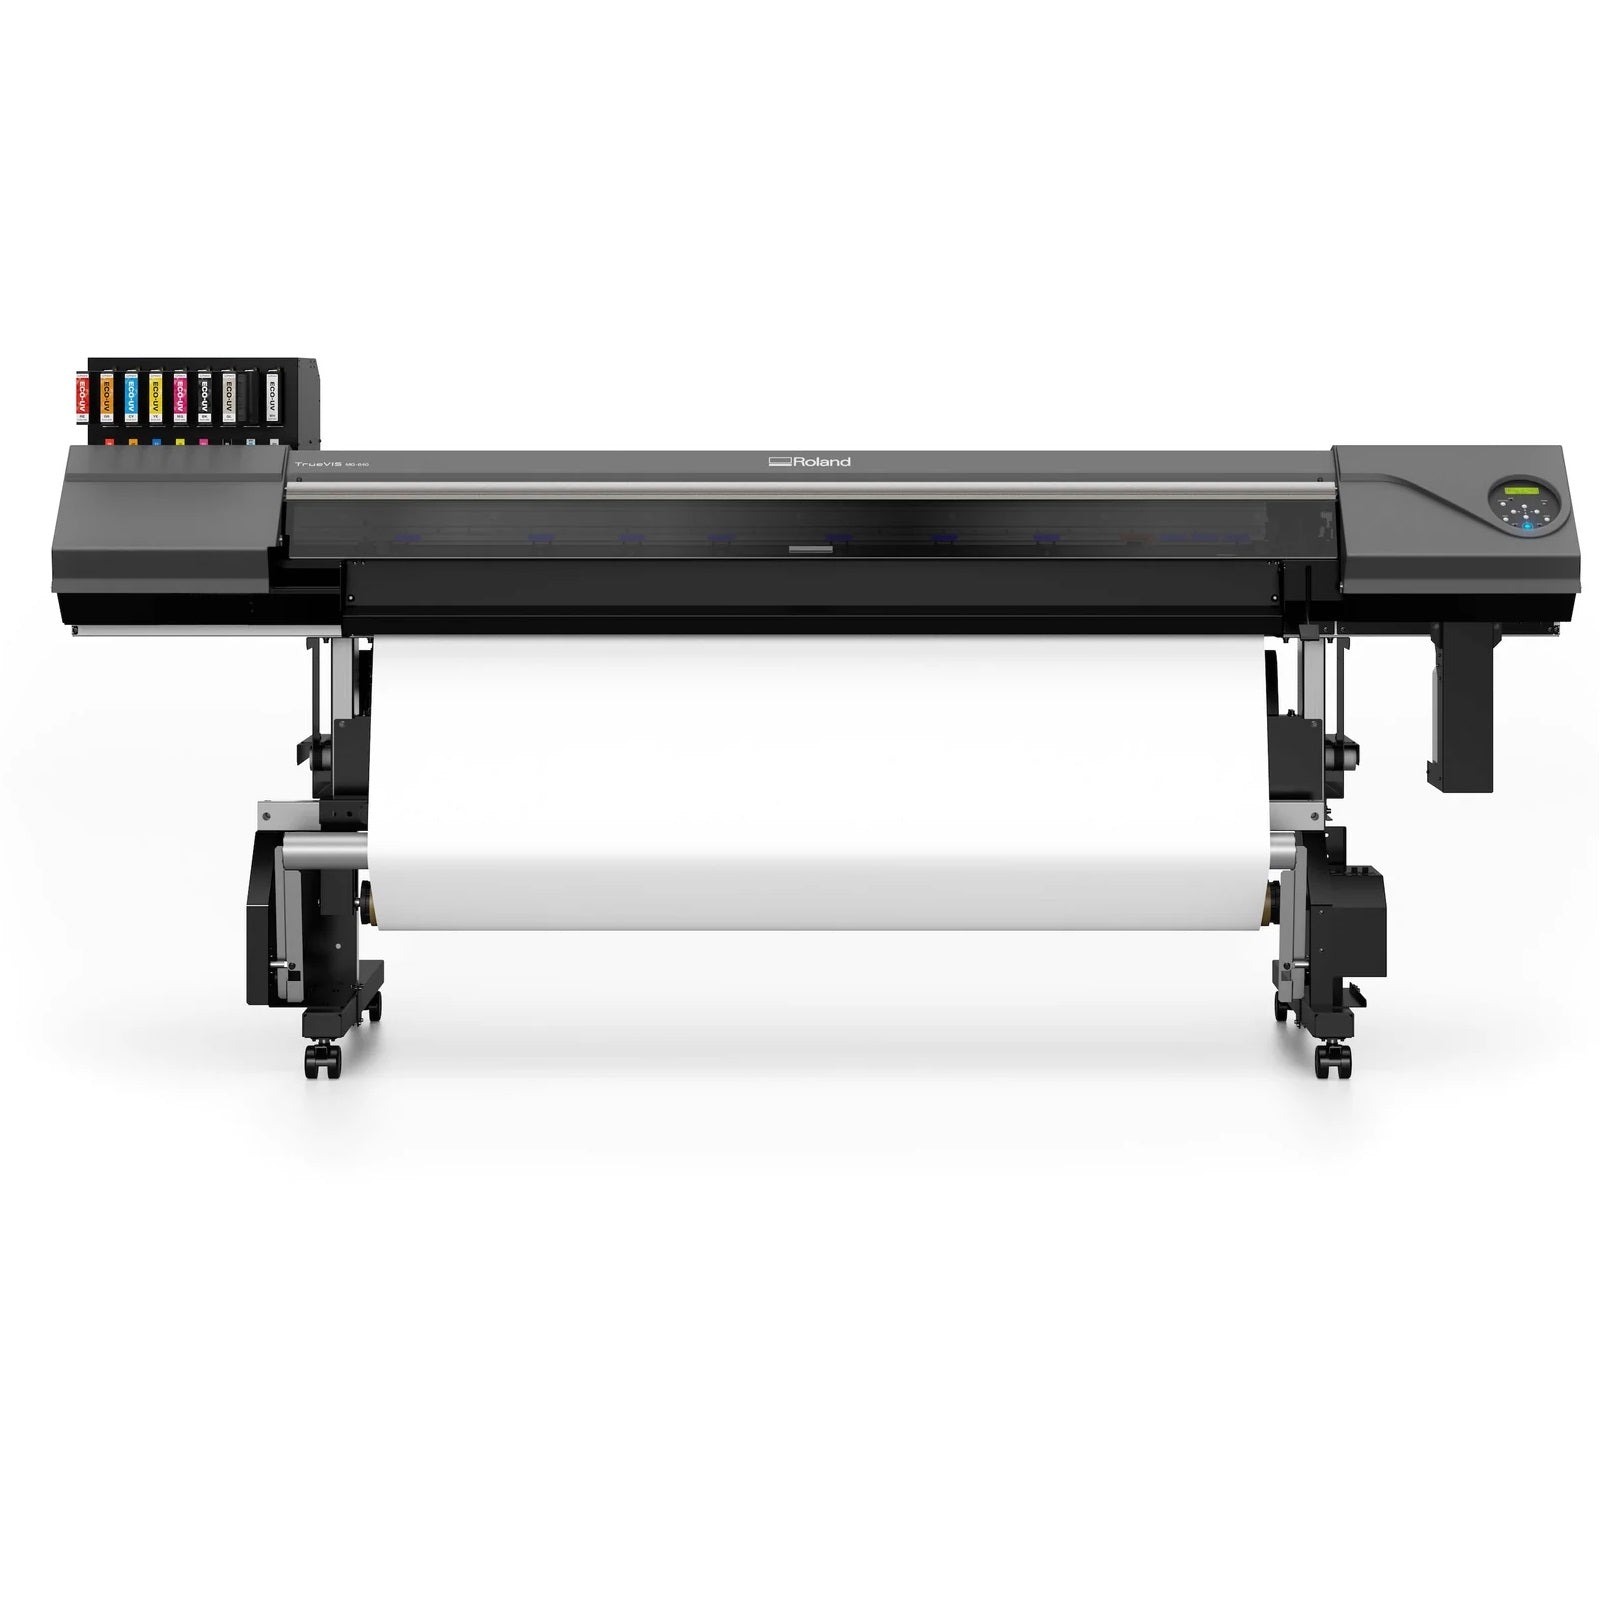 Absolute Toner Roland TrueVIS MG-640 64" UV LED Printer/Cutter (Print and Cut) With Built-in UV-LED Lamp Large Format Printers